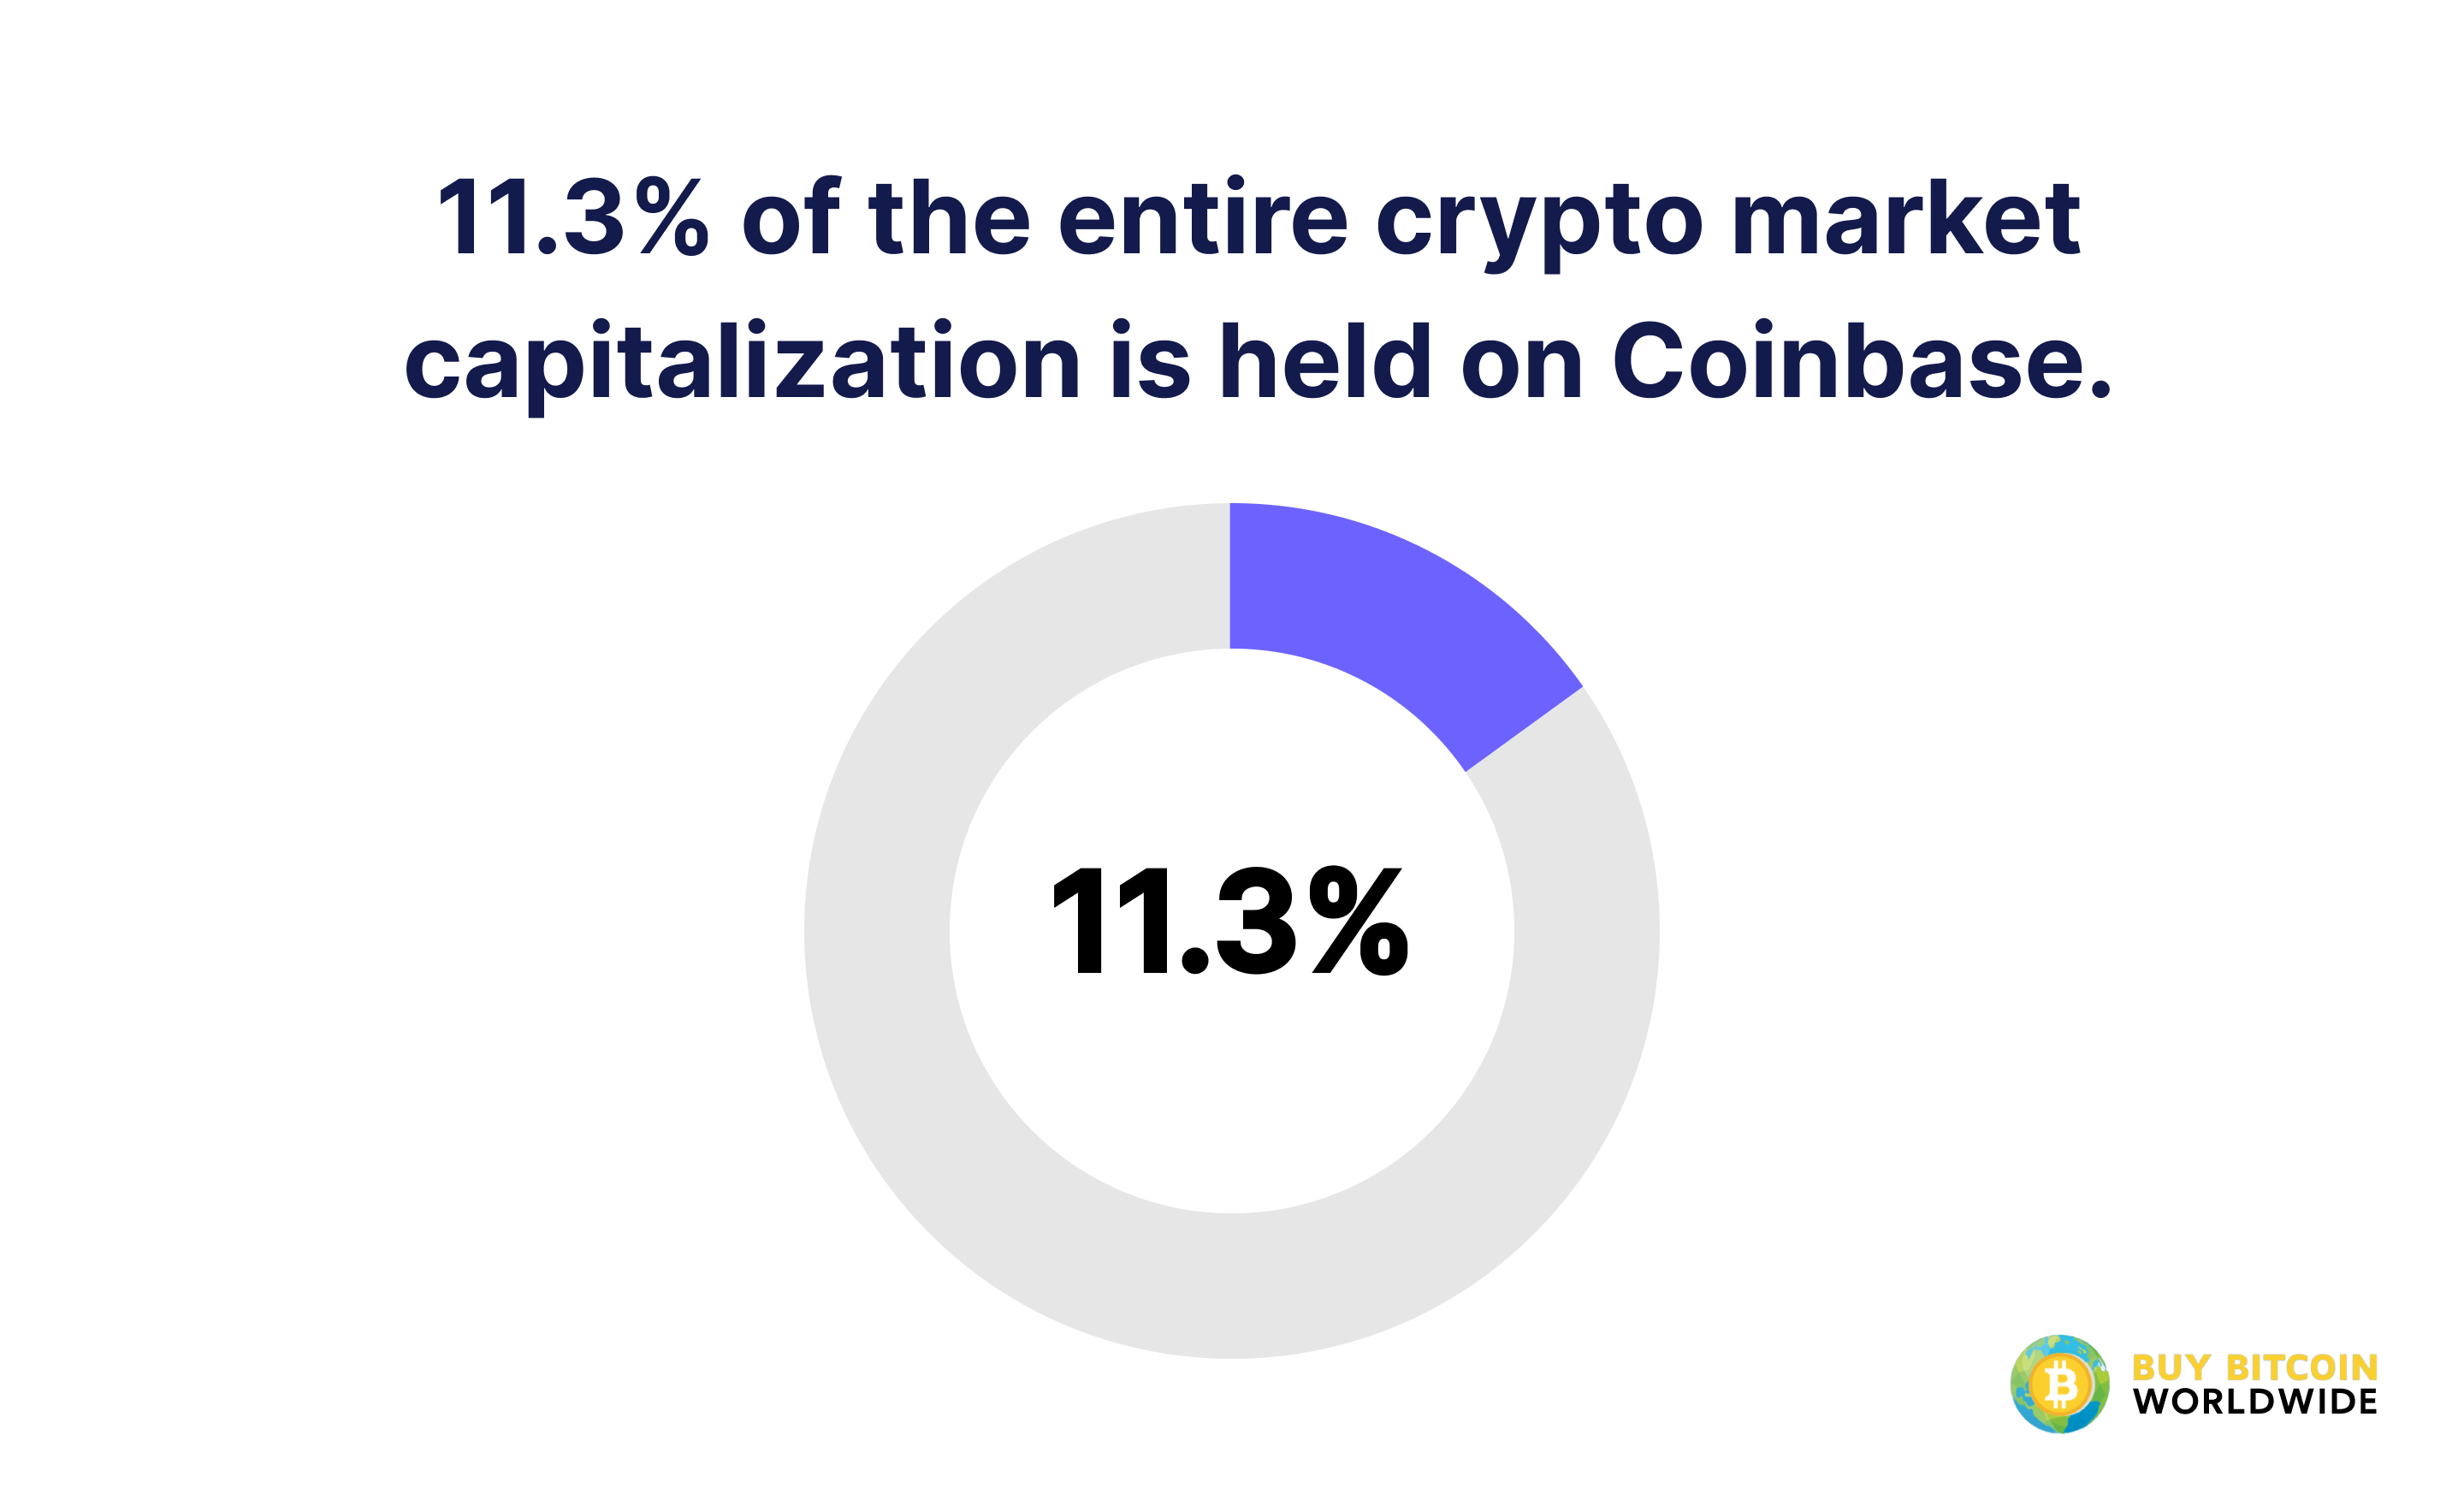 coinbase share of cryptocurrency market cap